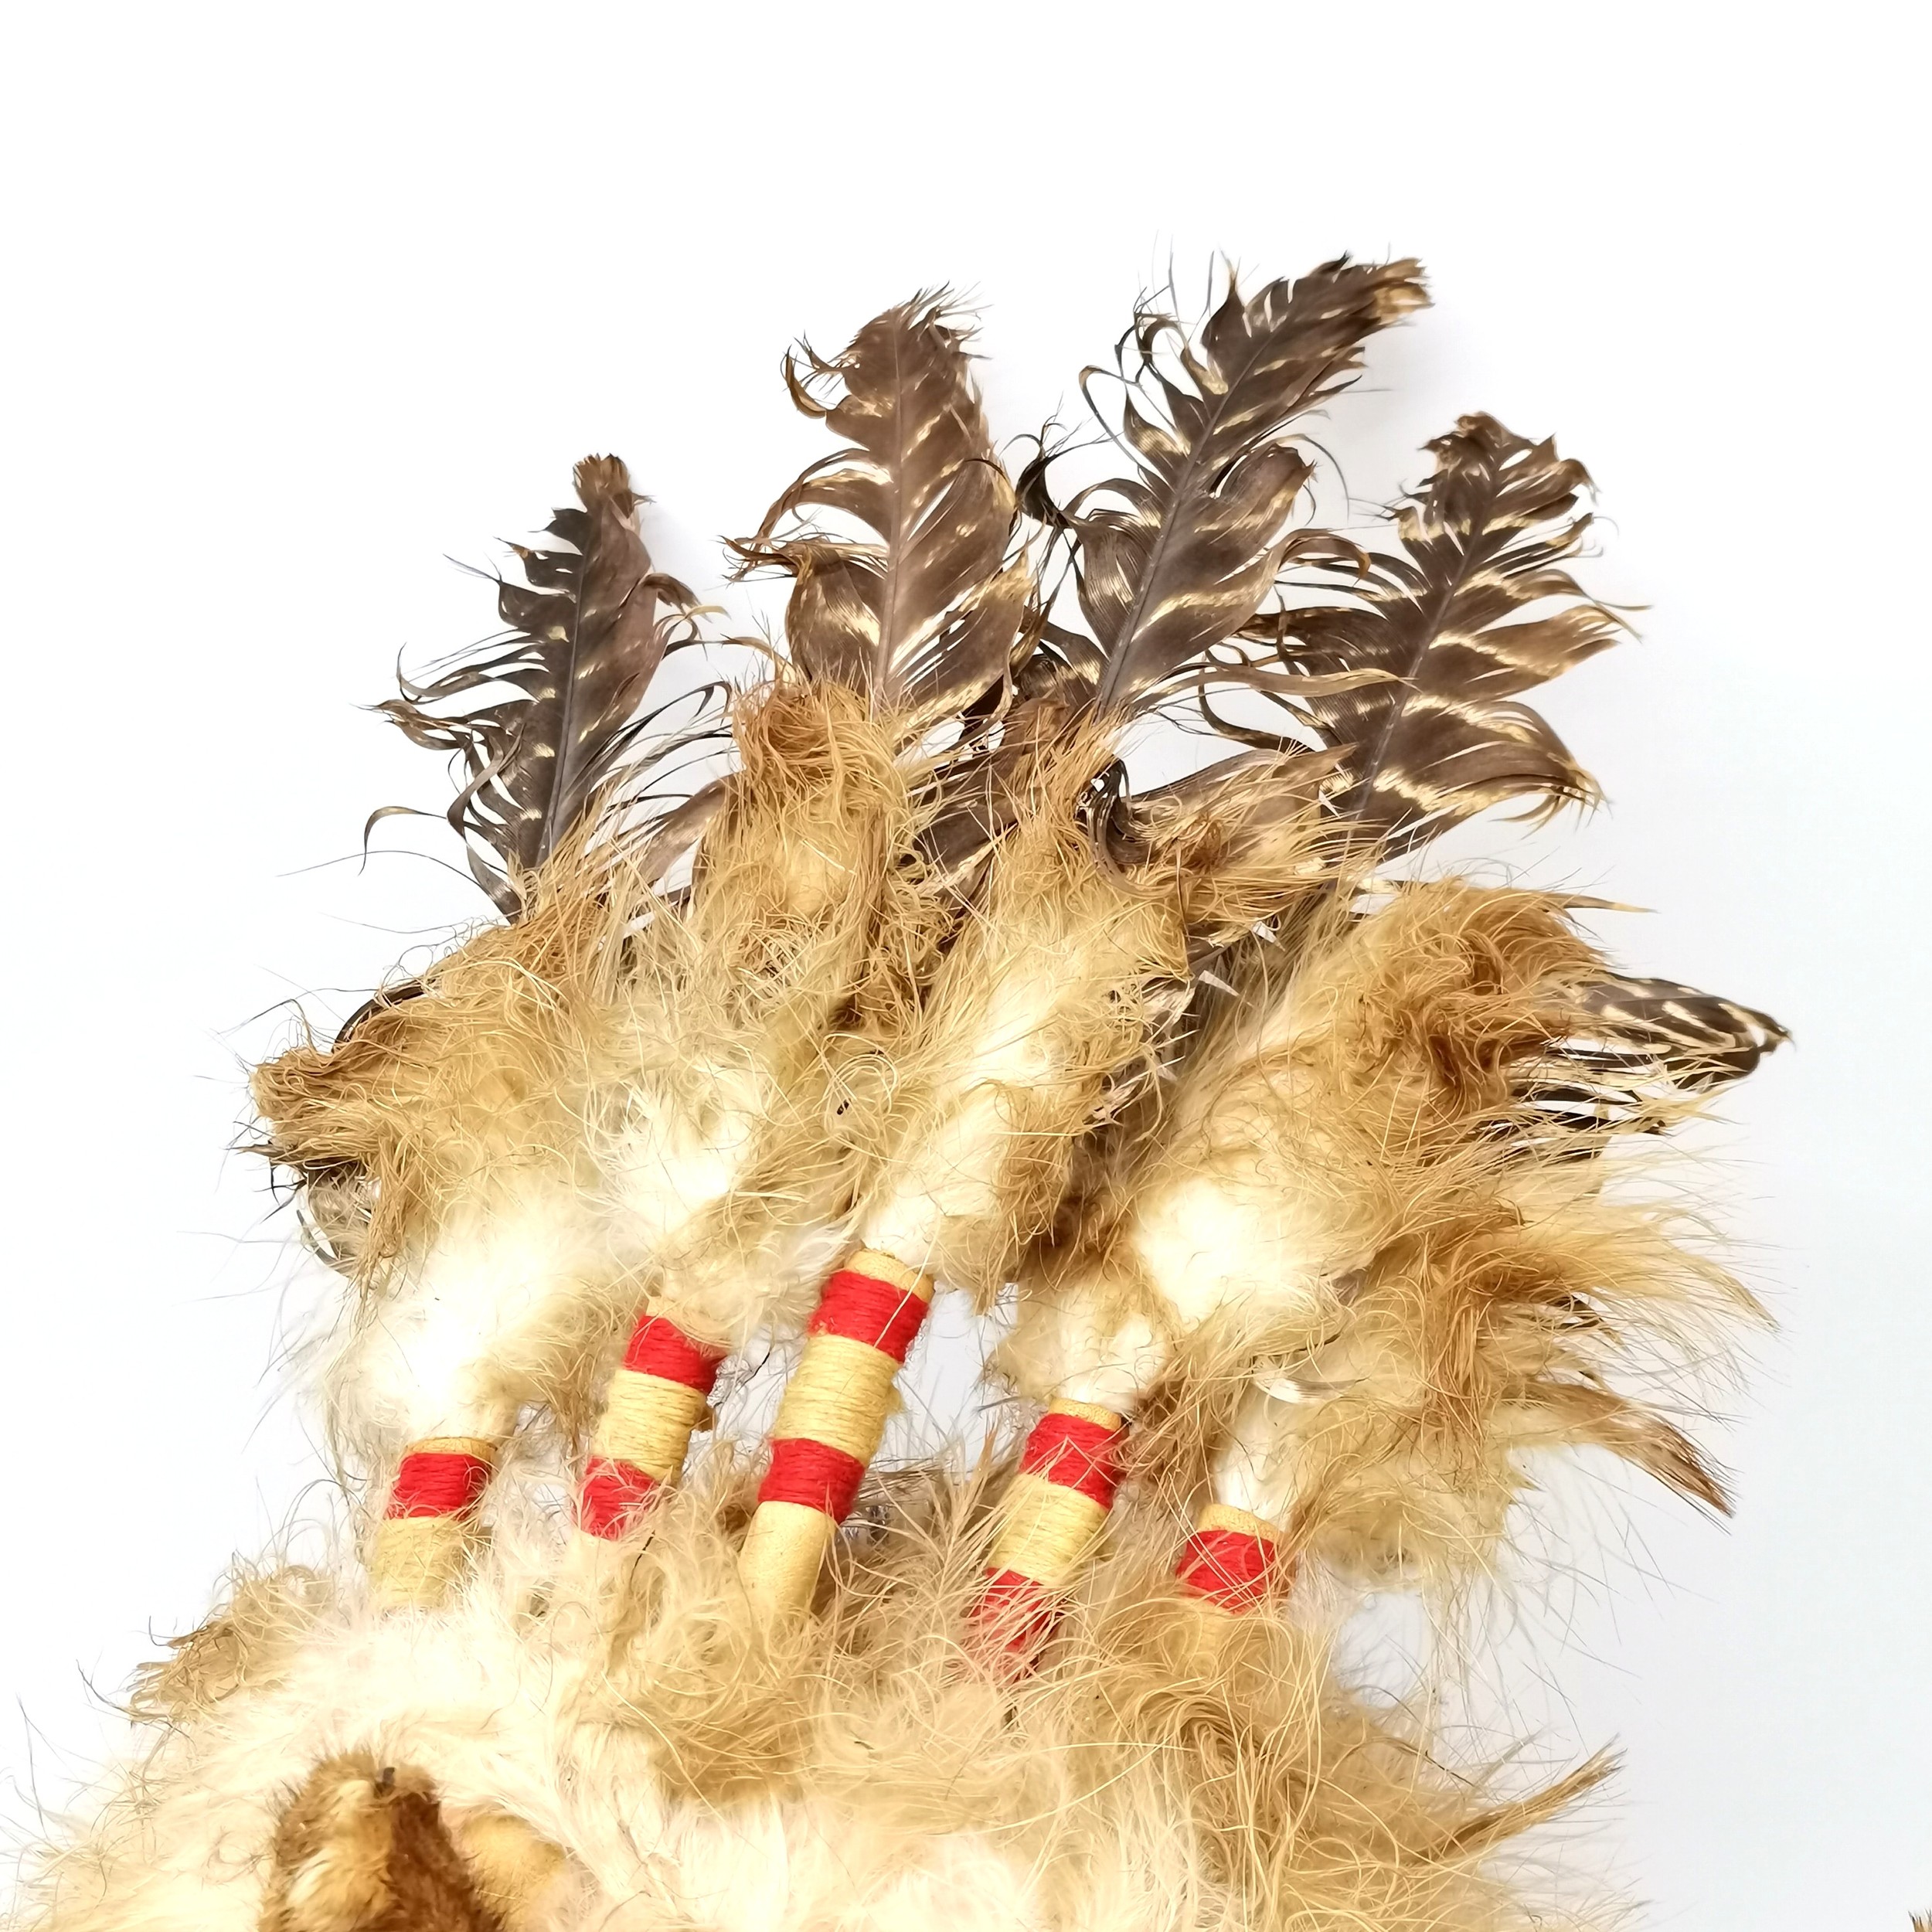 Native North American Indian shaman head-dress & stick rattle (68cm) with native beadwork decoration - Image 4 of 6